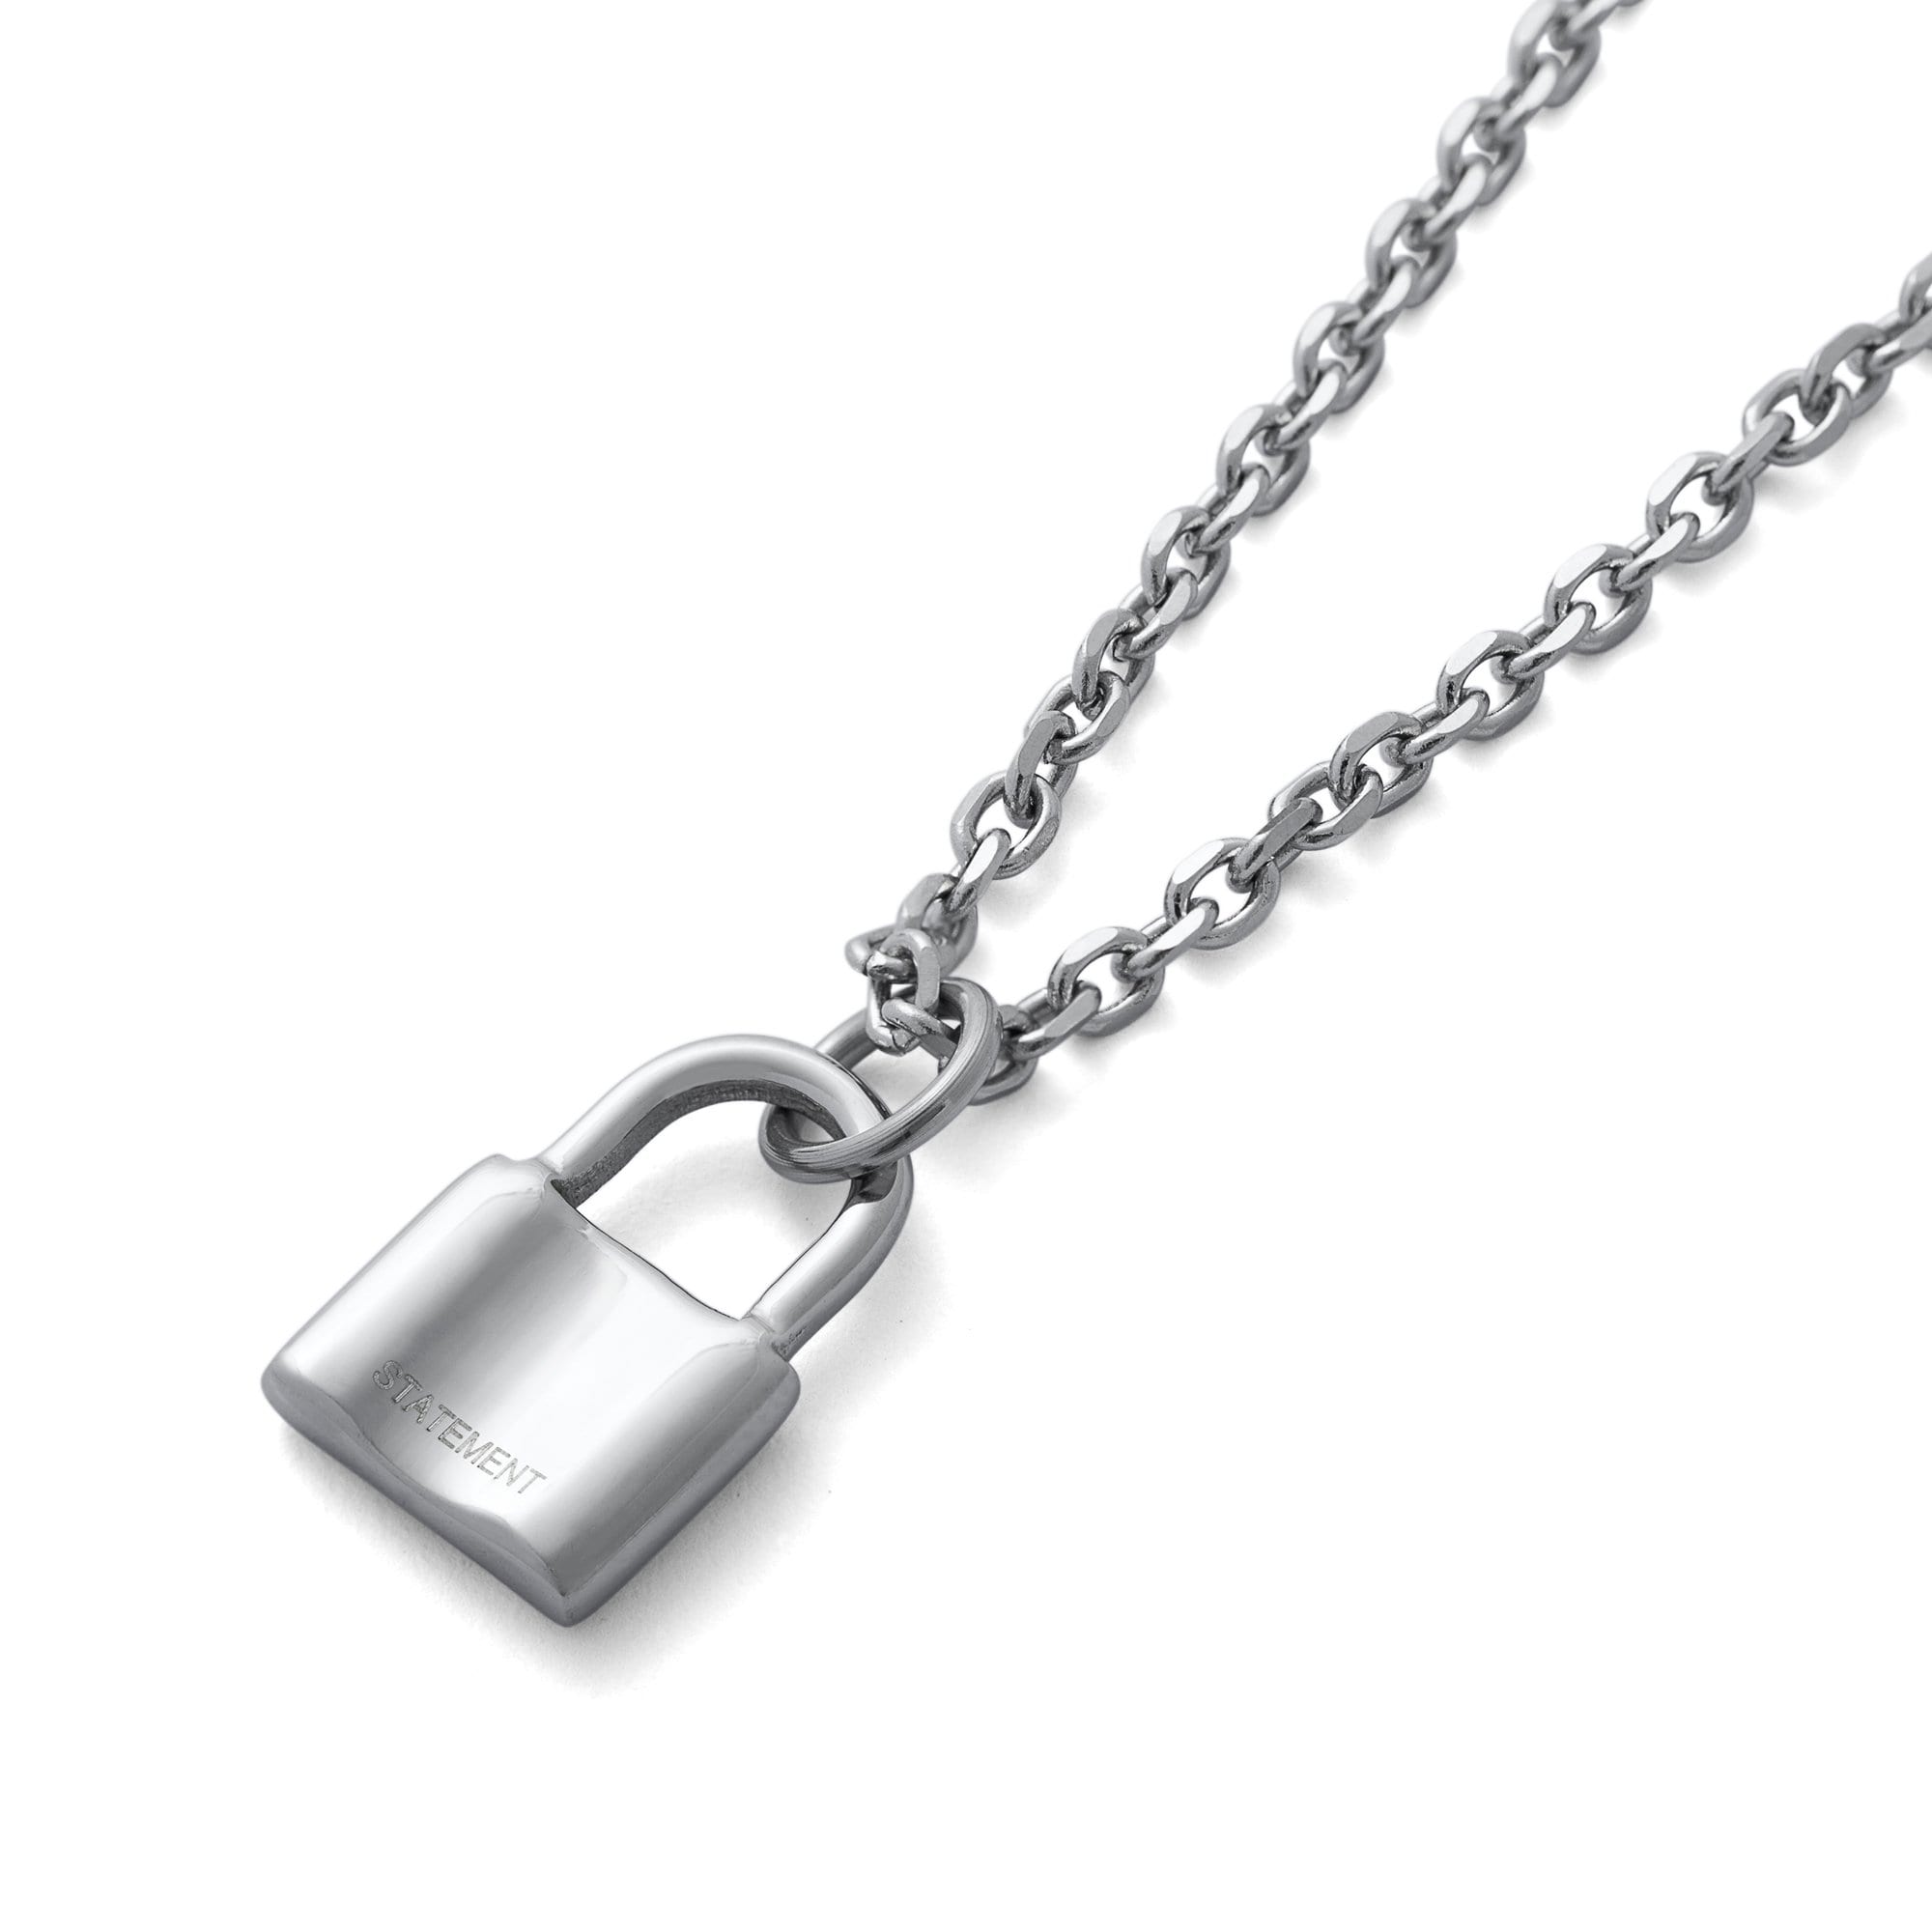 Mini Padlock Necklace Pendant by Statement Collective_01